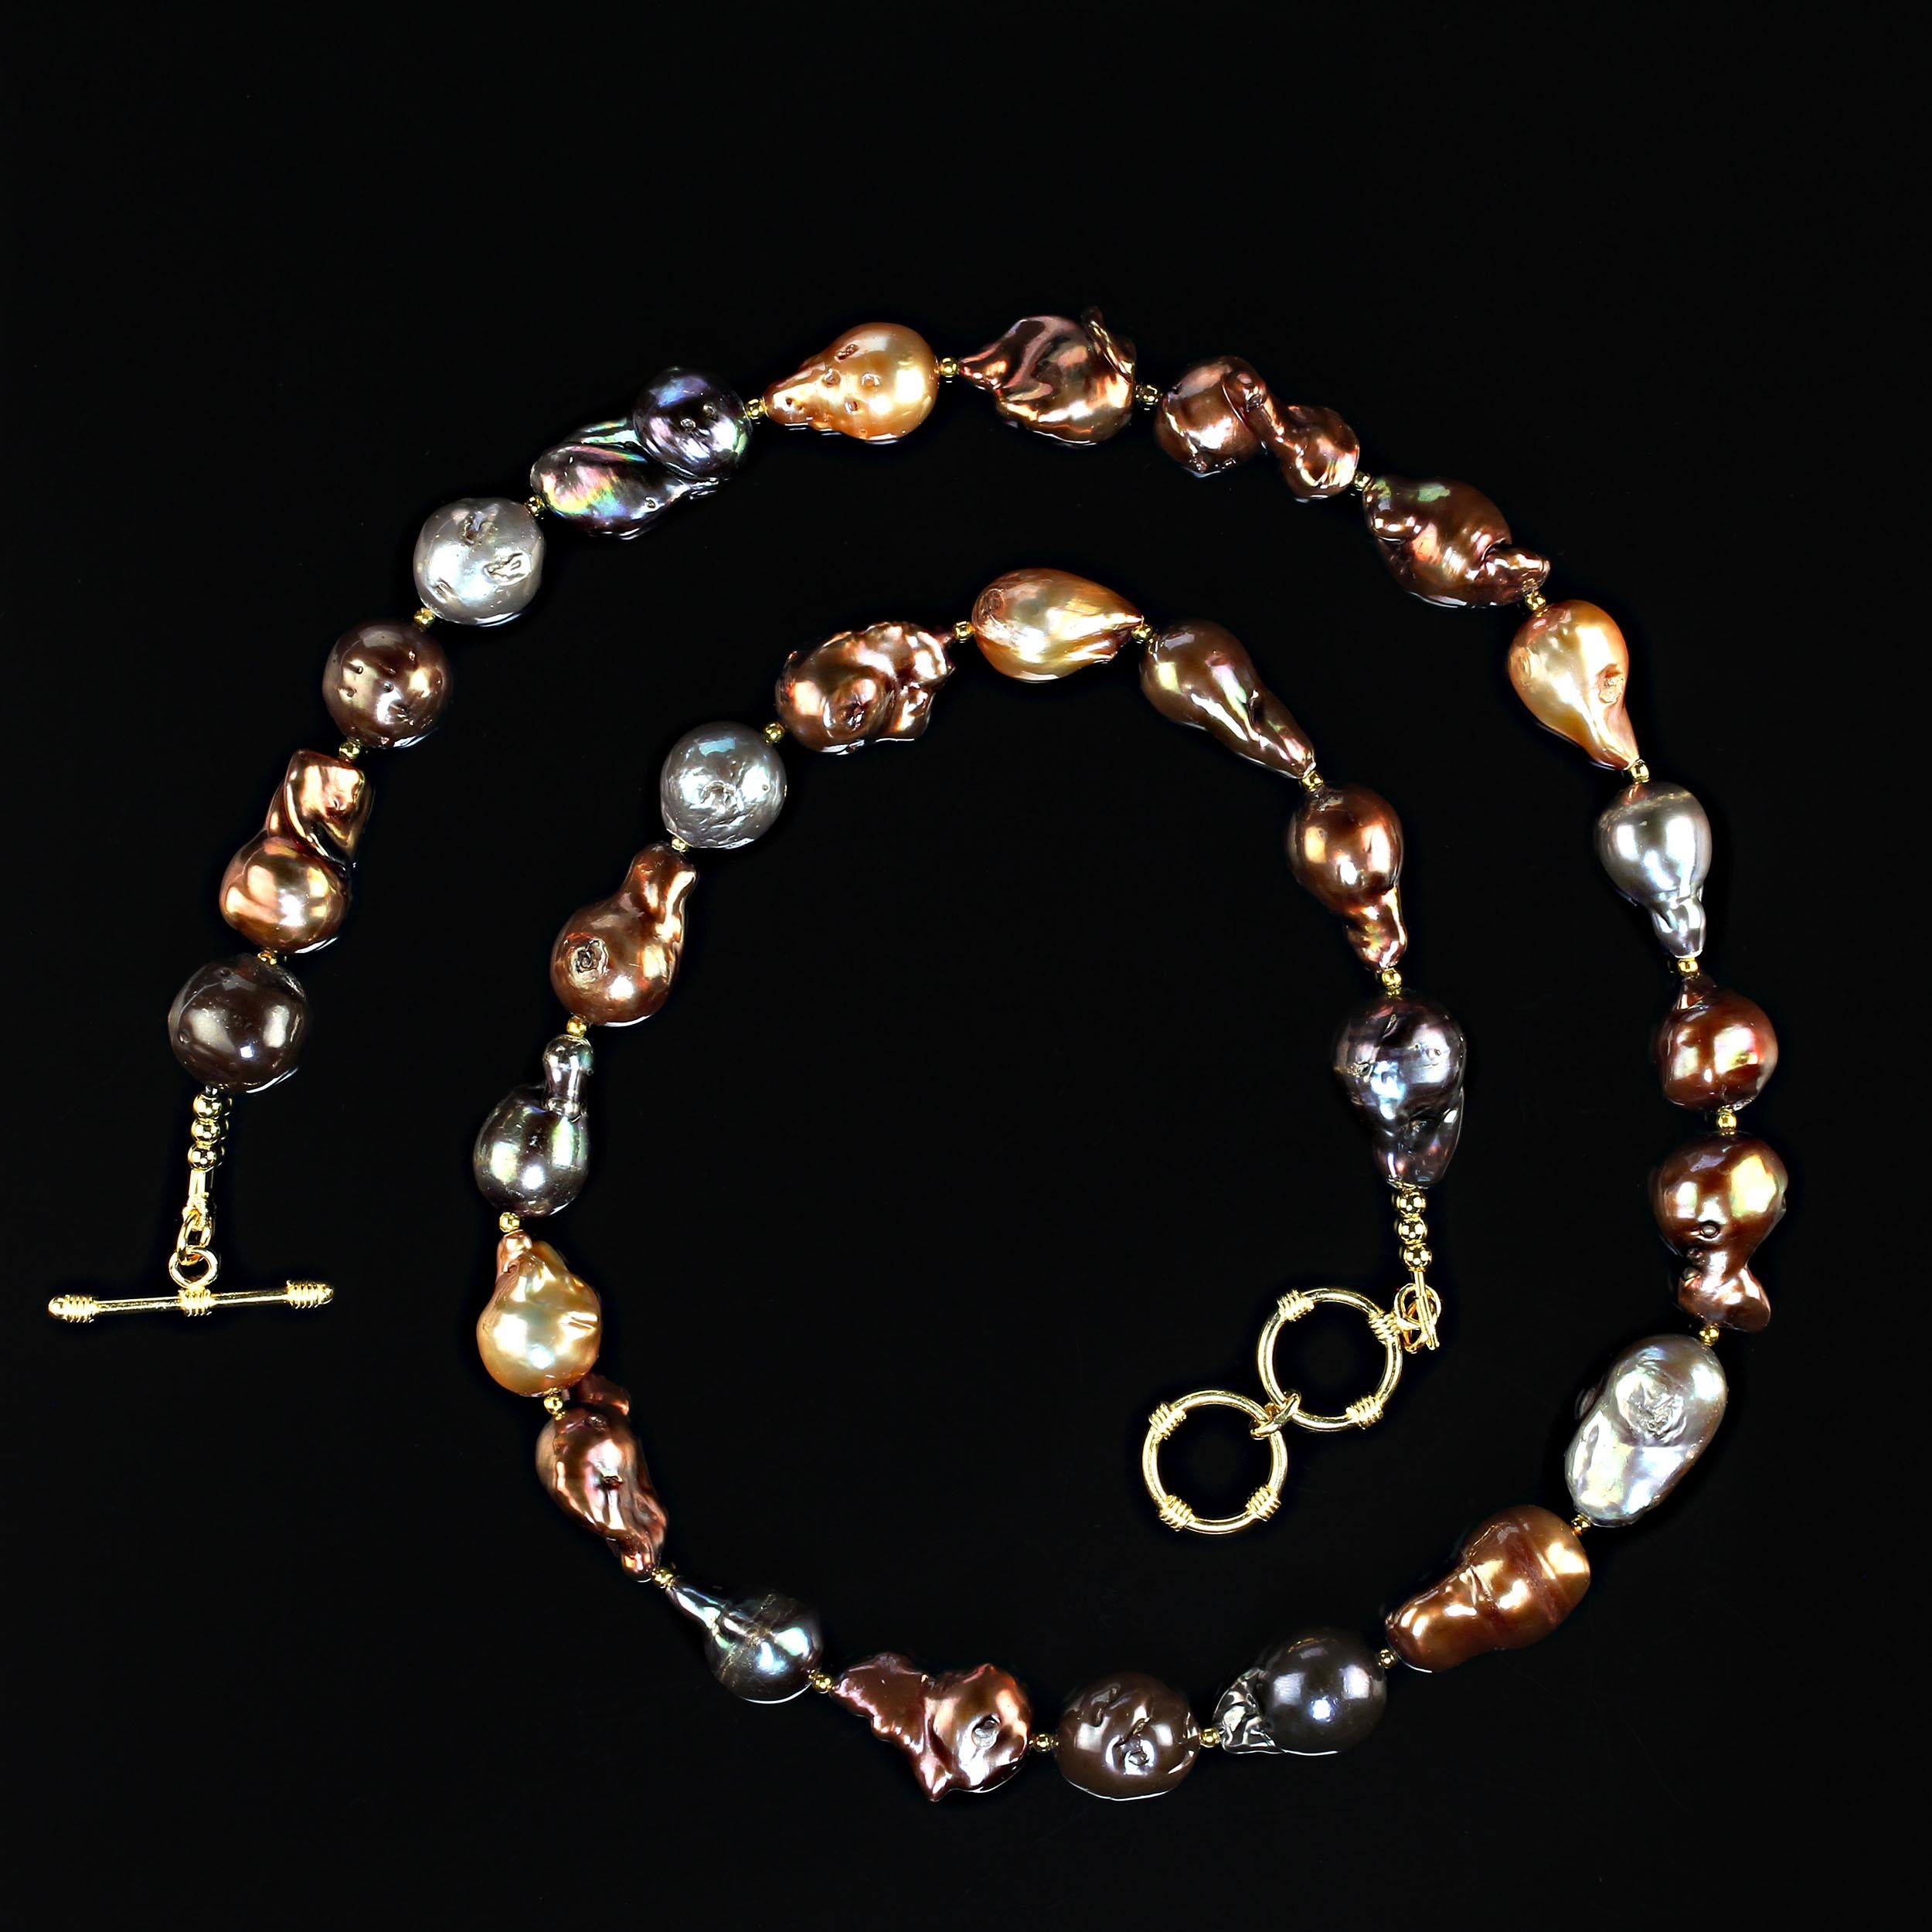 23-24 Inch expandable multi color baroque freshwater pearl necklace with goldy accents.  This elegant necklace features dyed iridescent freshwater pearls in shades of gold, bronze, brown, and gray.  The unique shapes will please and delight your